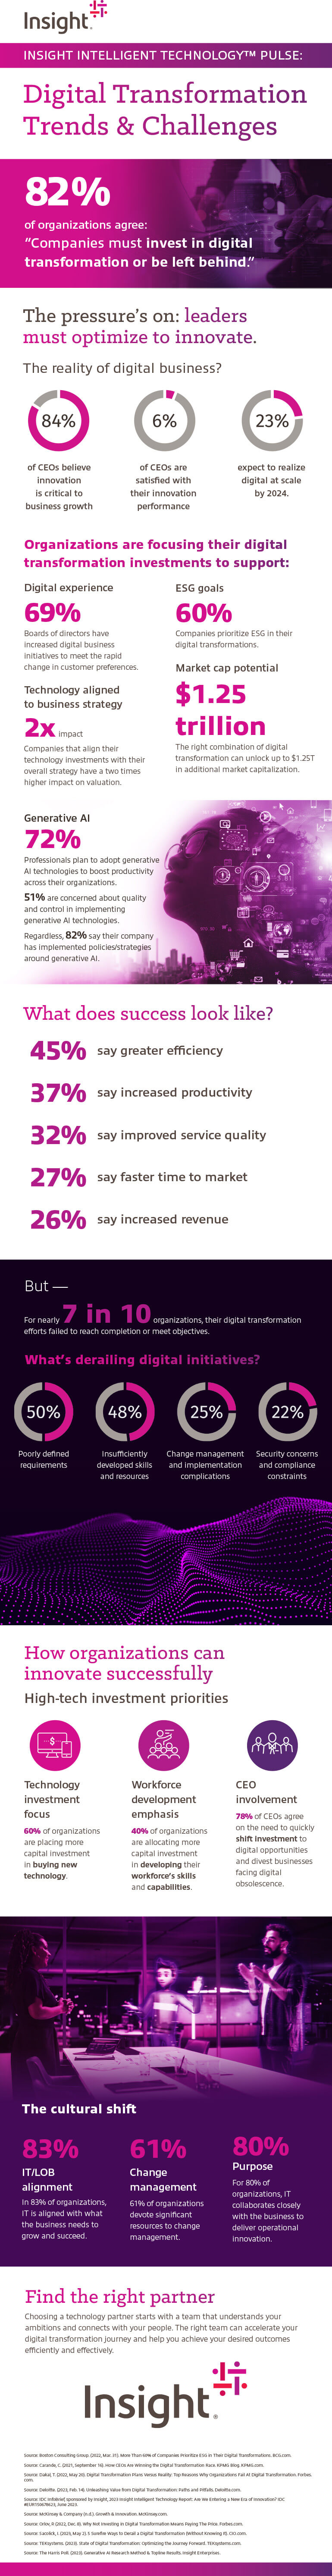 2023 Insight Intelligent Technology Pulse: Digital Transformation Trends and Challenges infographic as transcribed below